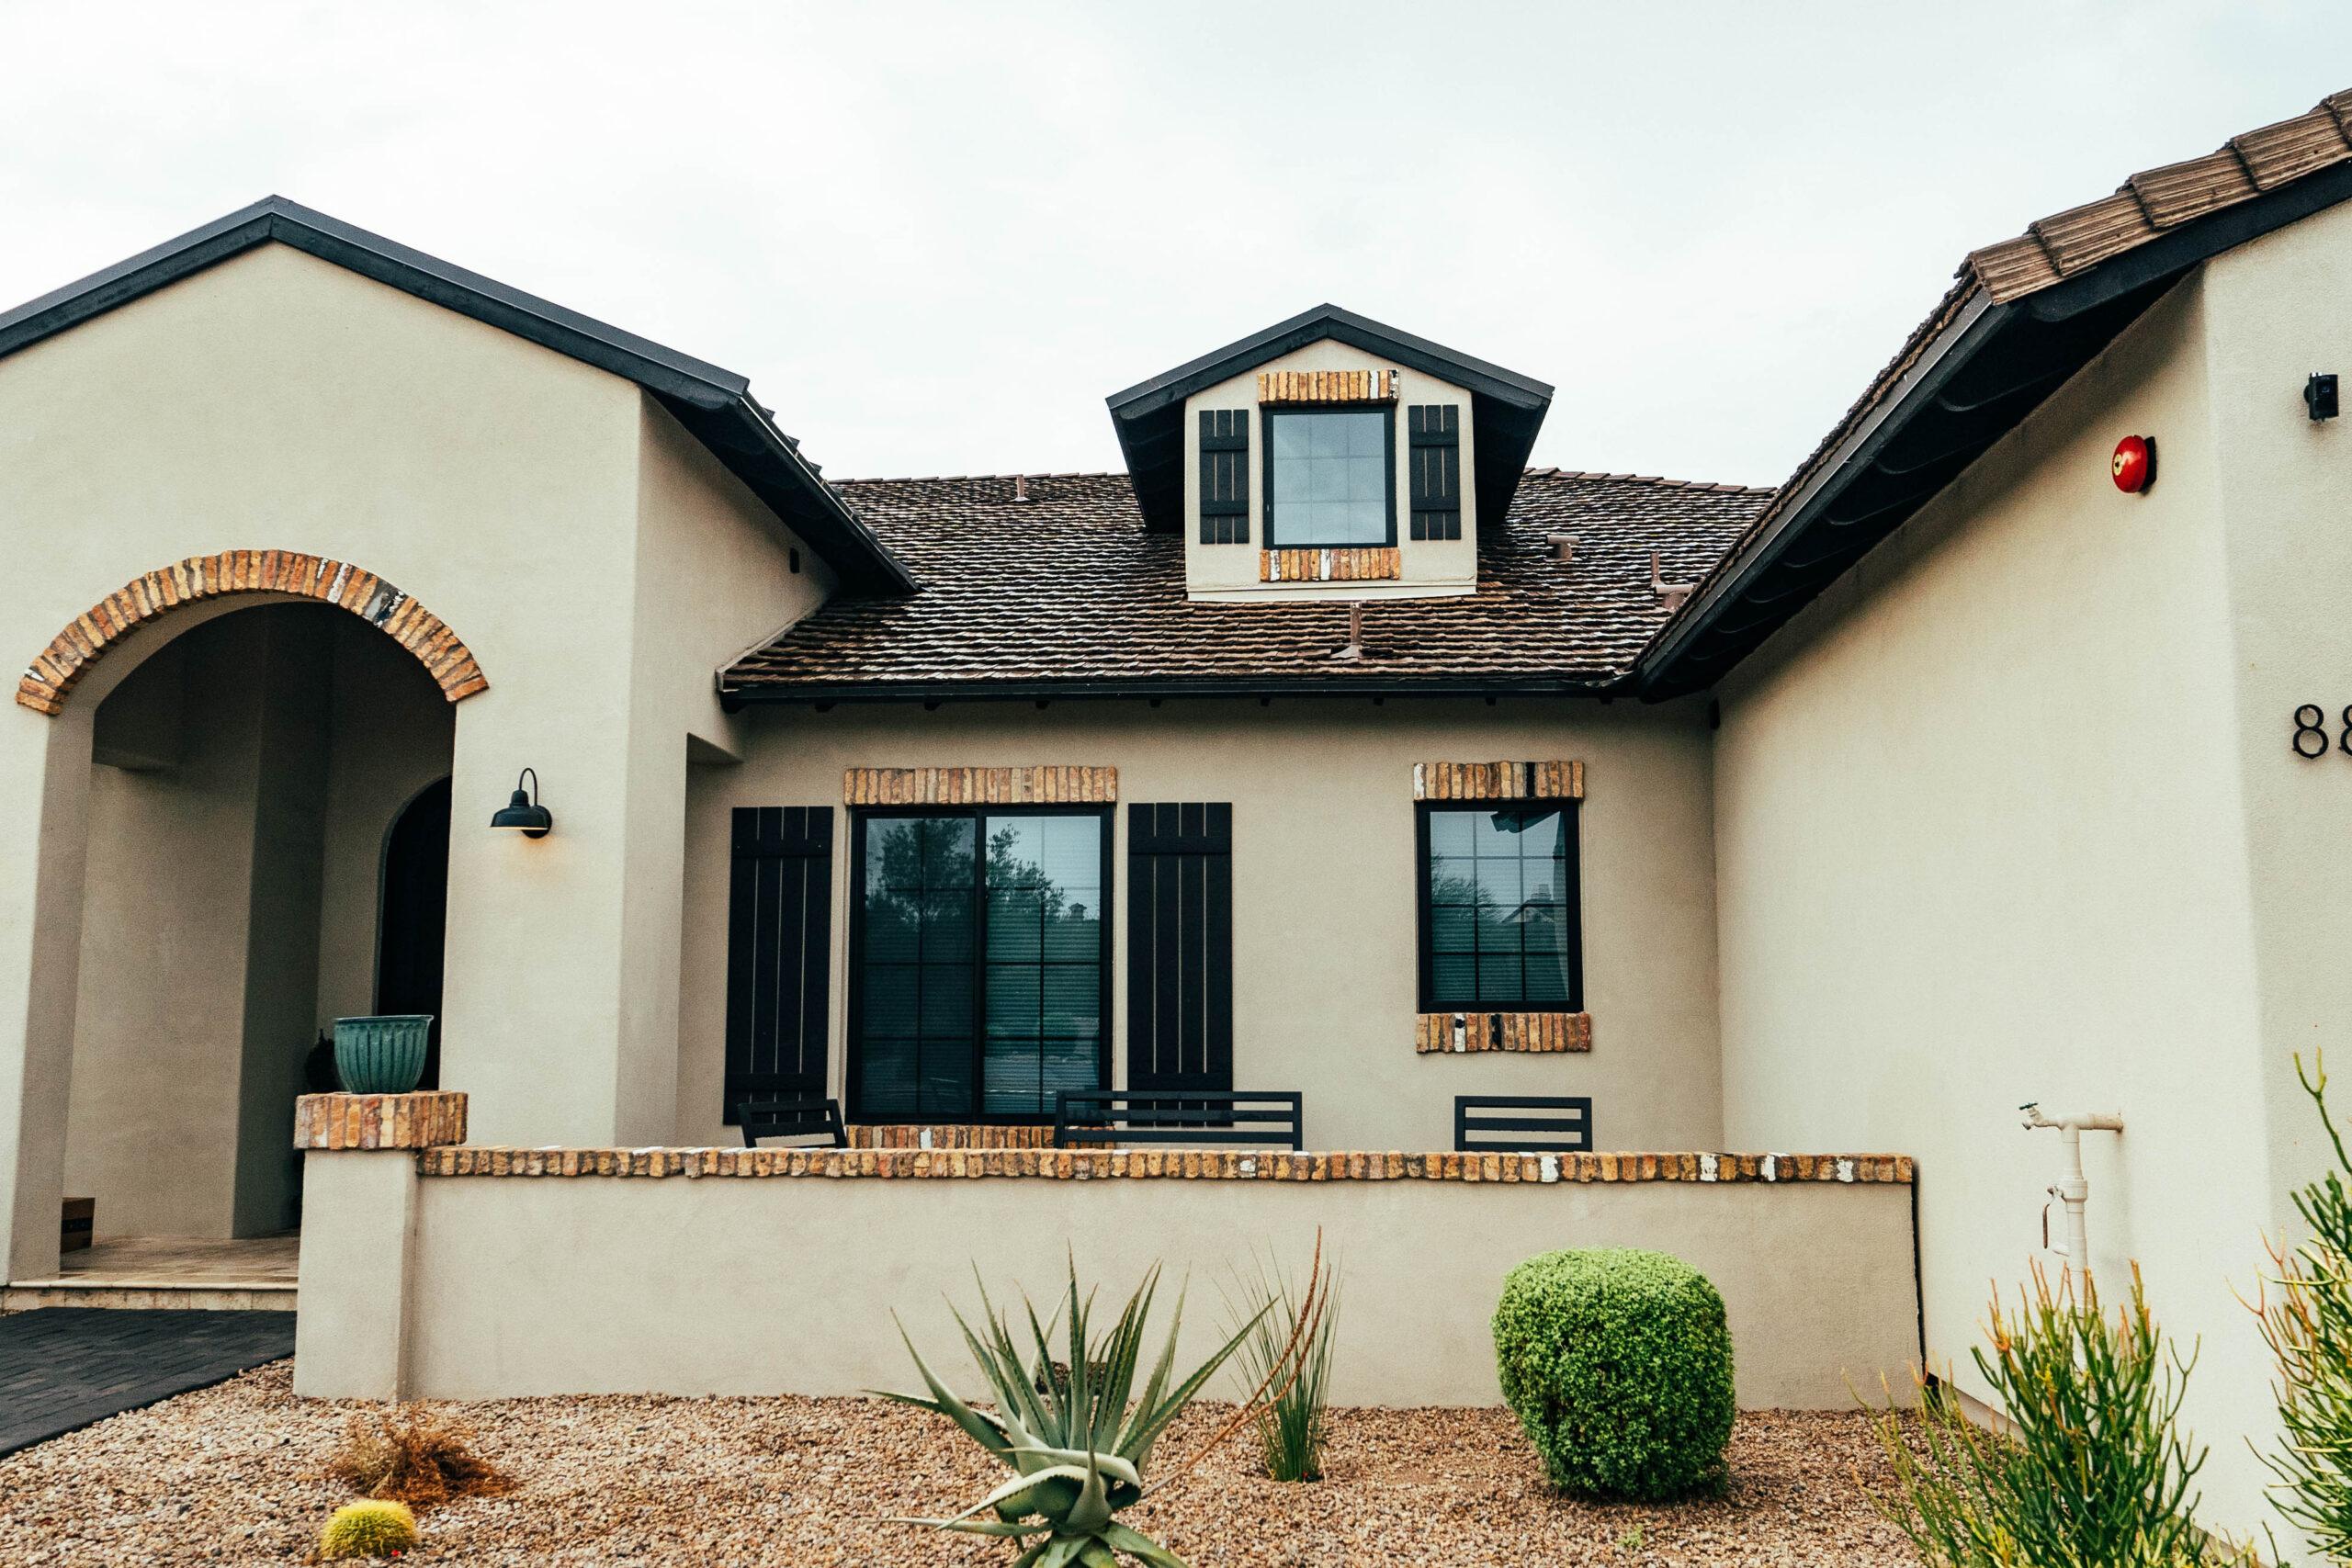 A brand-new McCormick Ranch residence, enhanced by its just-installed tile roofing.